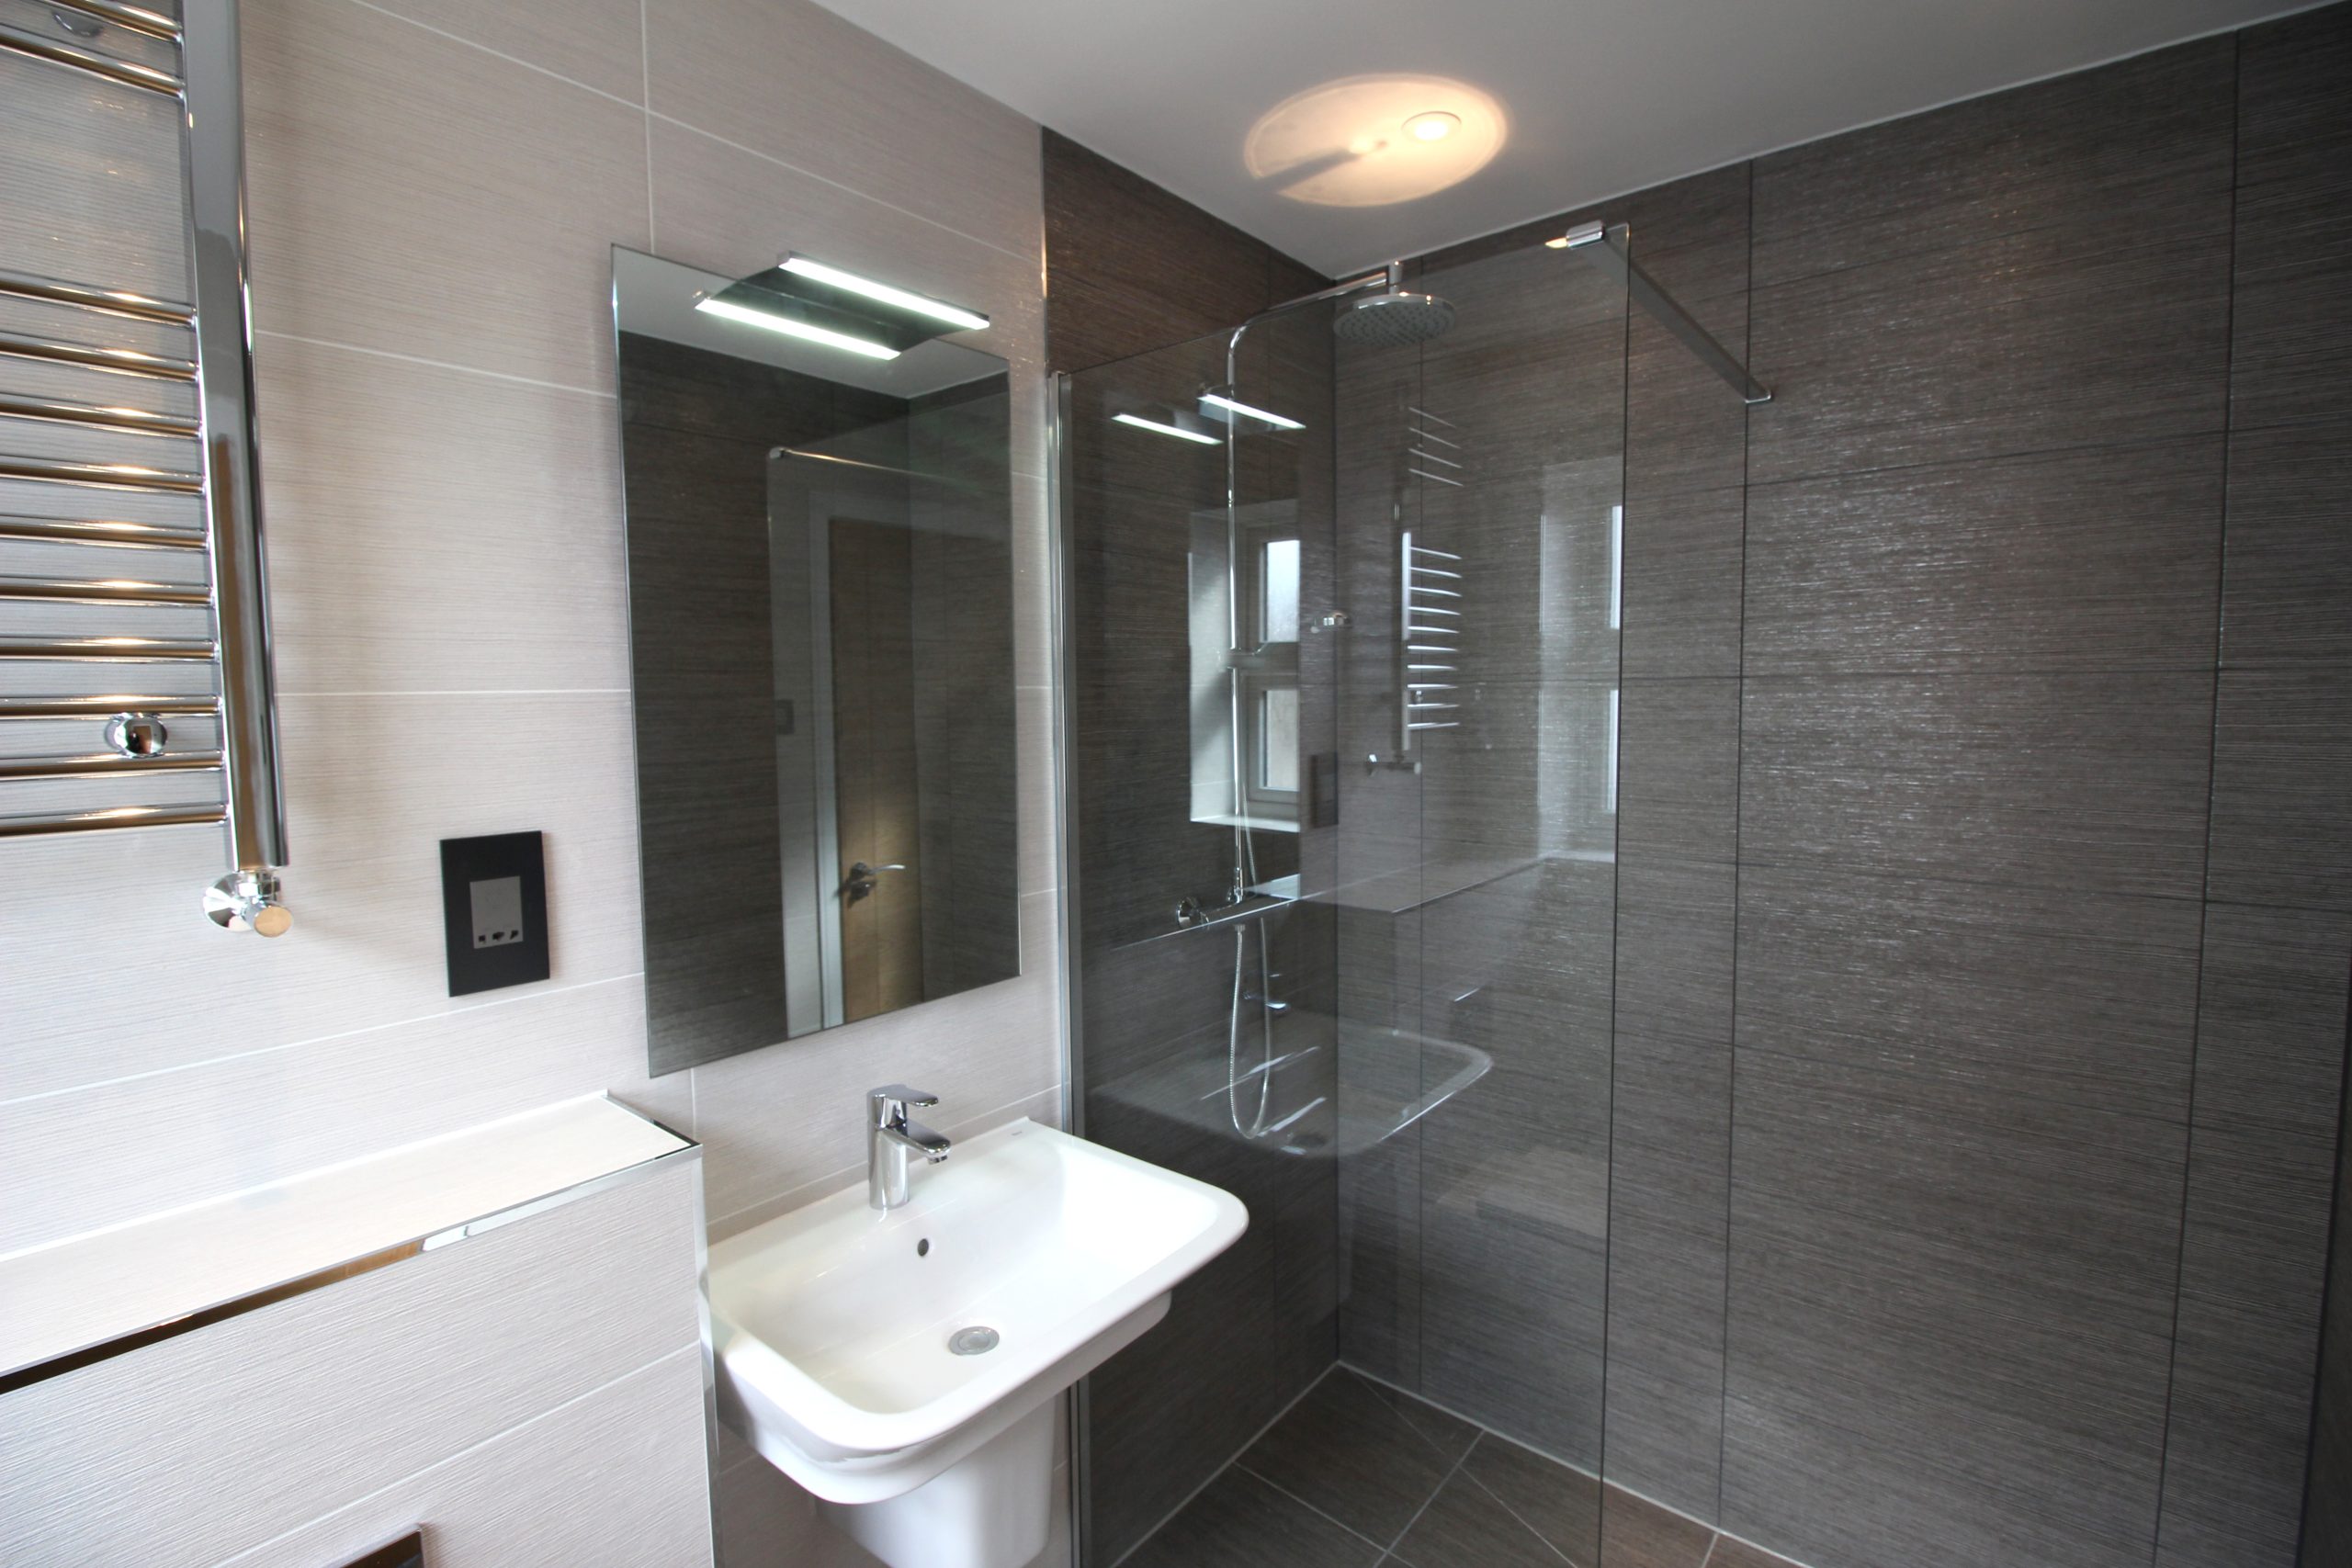 A Clarendon Bathroom image with sink and shower